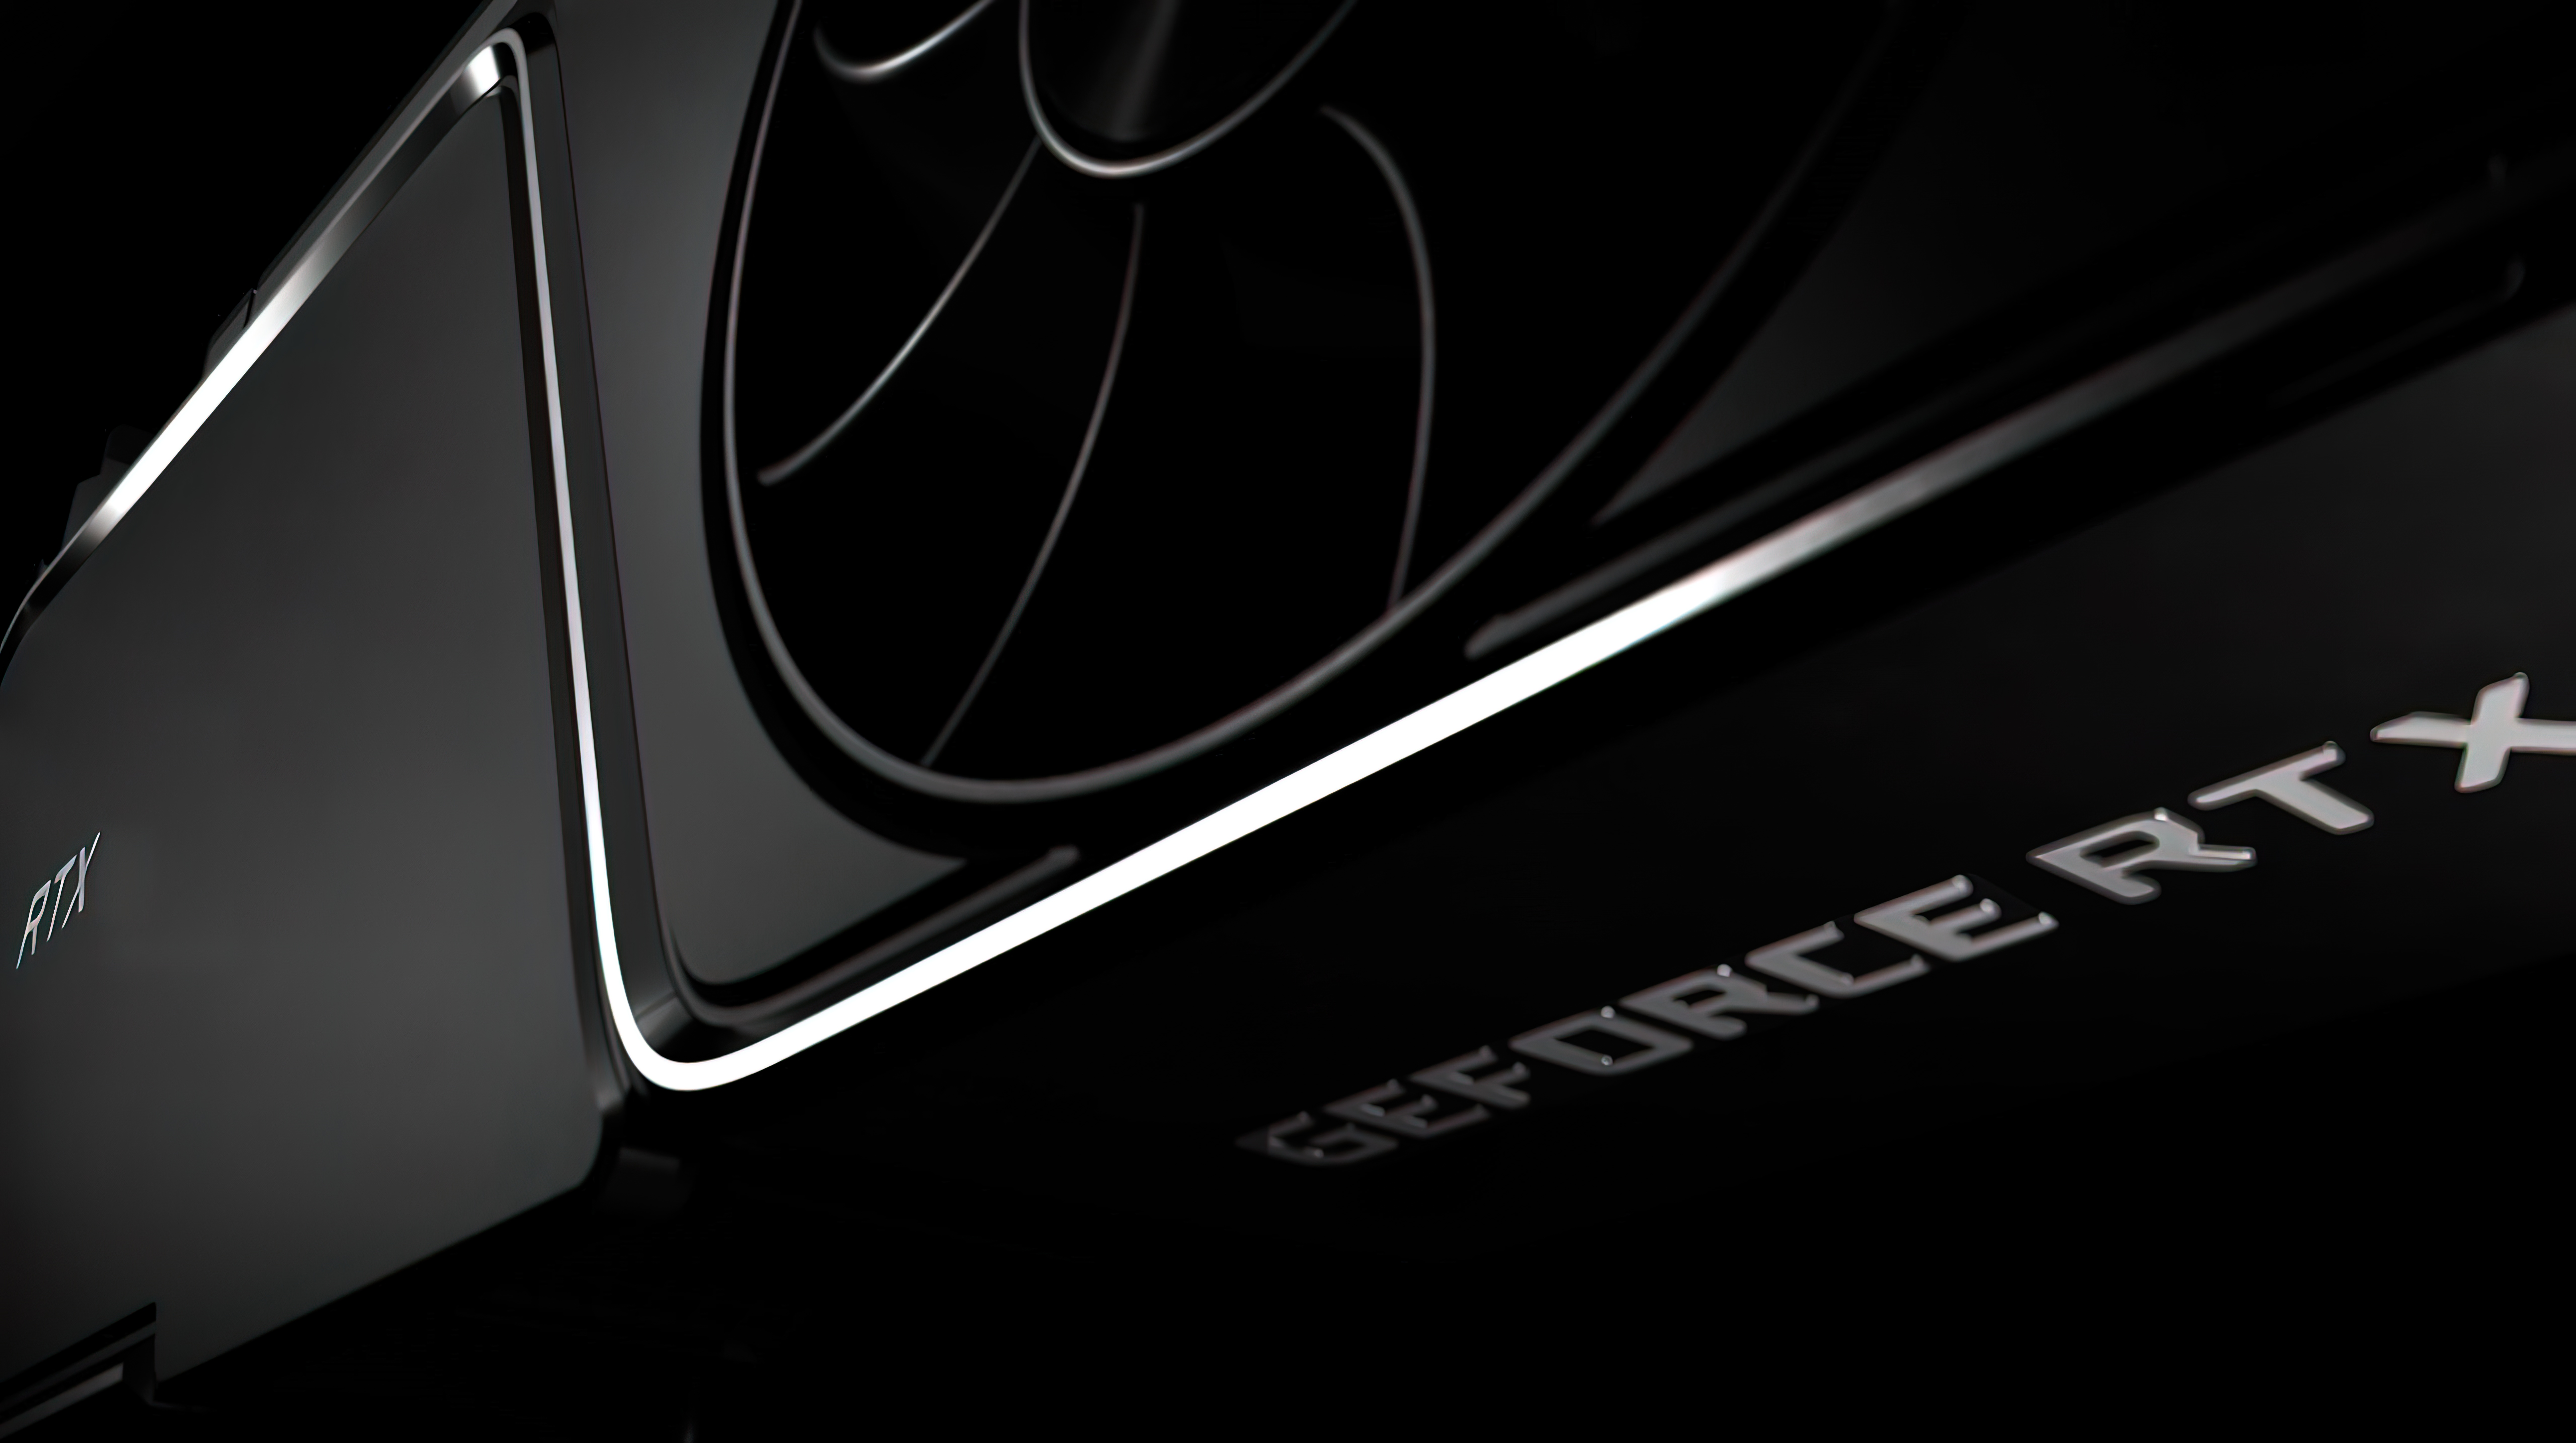 geforce-rtx-3070-ti-product-gallery-full-screen-3840-1-scaled-very_compressed-scale-4_00x.jpg